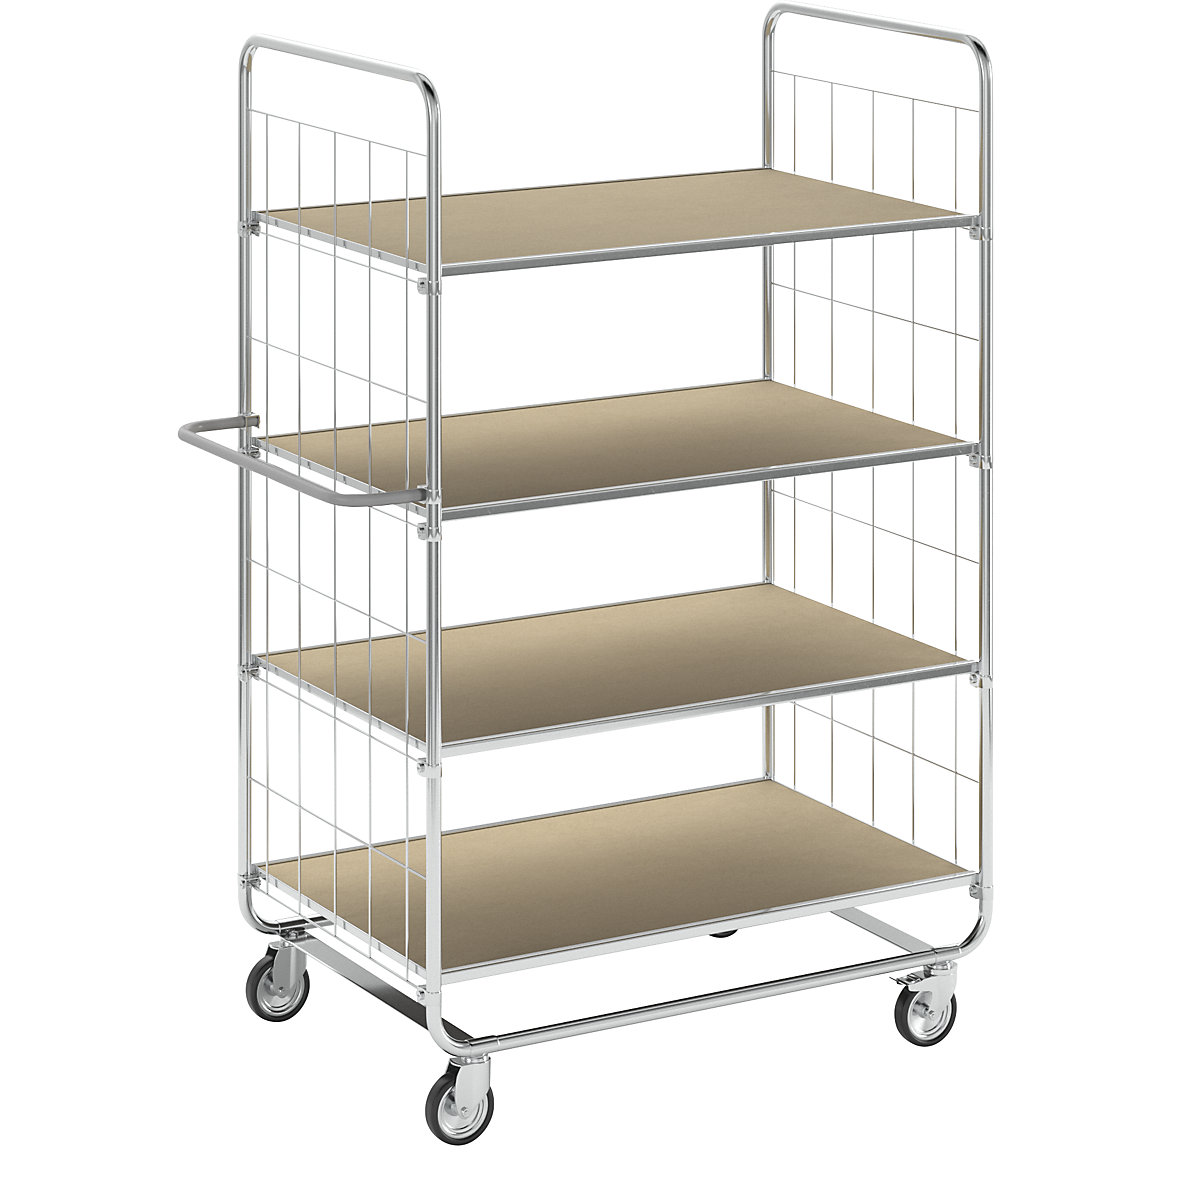 ESD shelf truck, with 4 shelves – Kongamek, 4 castors, 2 with stops, LxWxH 815 x 470 x 1120 mm, 2+ items-3